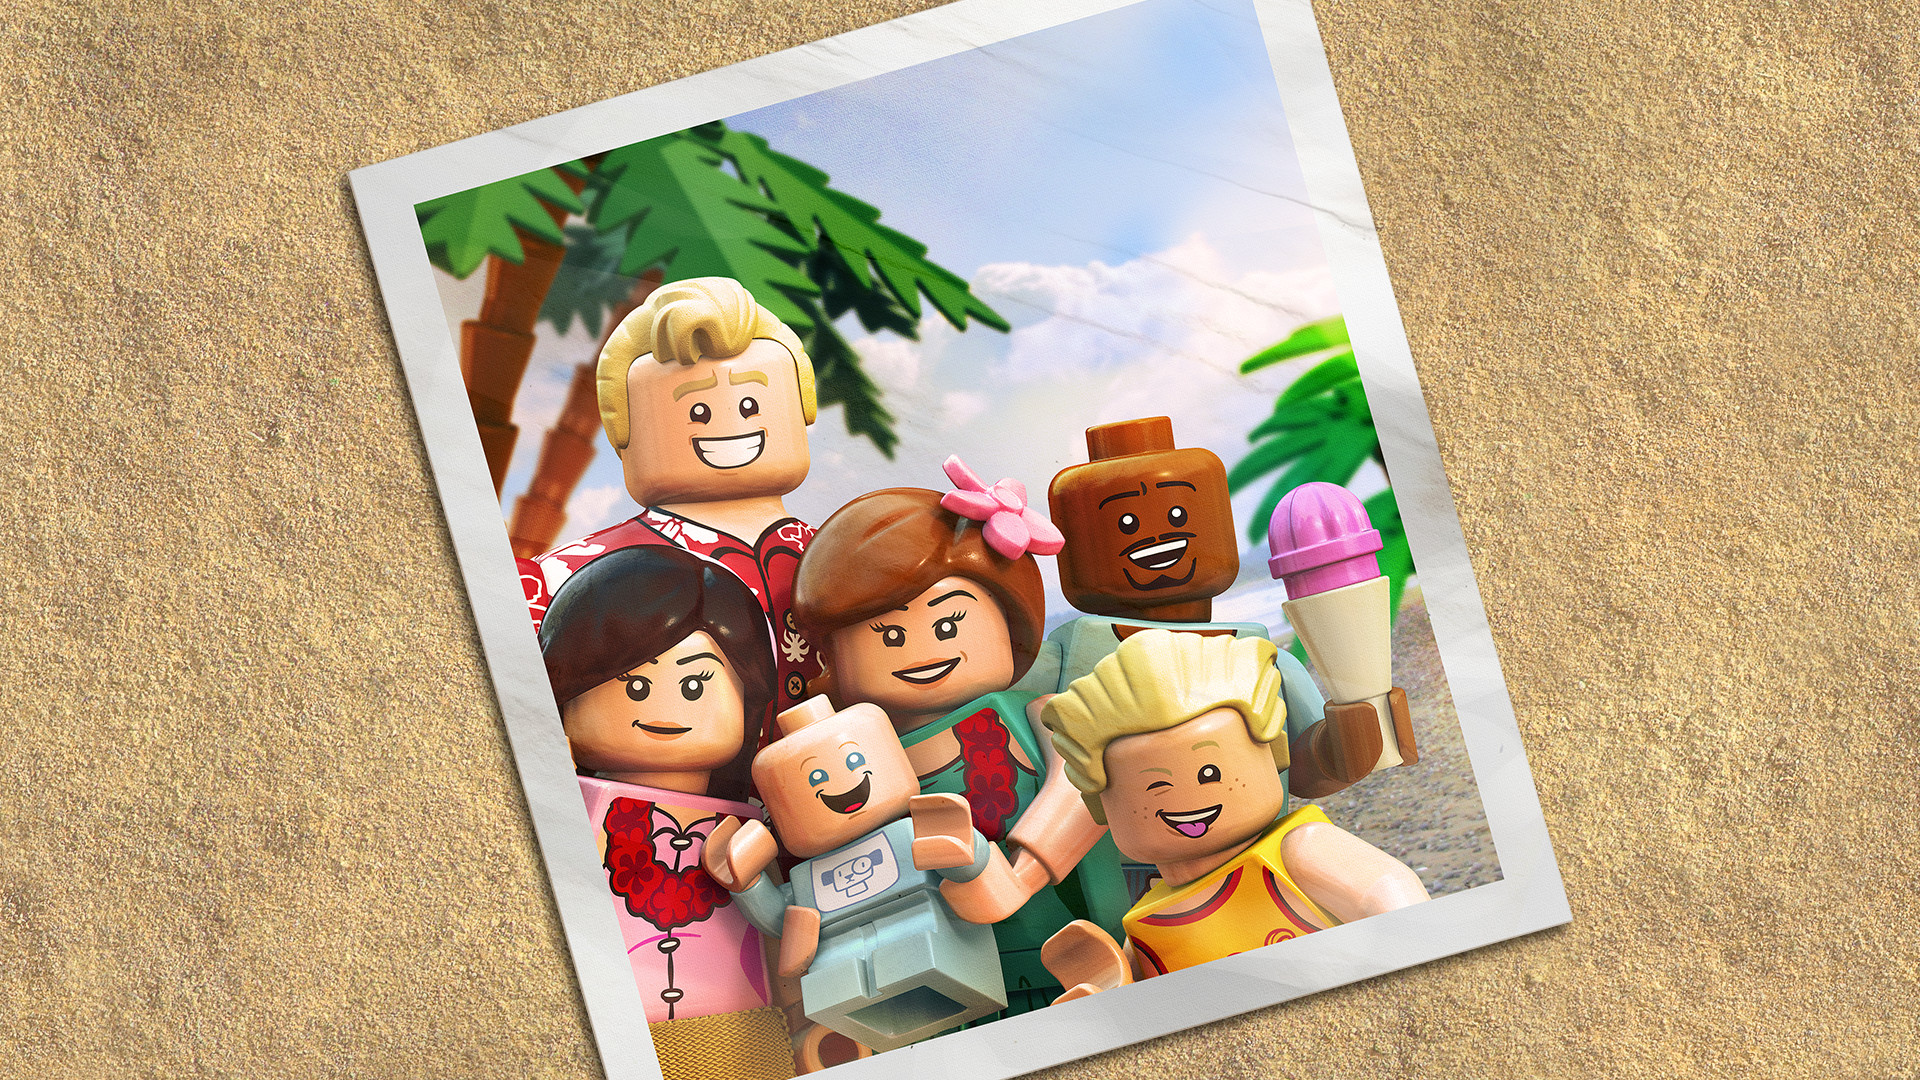 LEGO THE INCREDIBLES - Parr Family Vacation Character Pack DLC EU PS5 CD Key, 0.73 usd